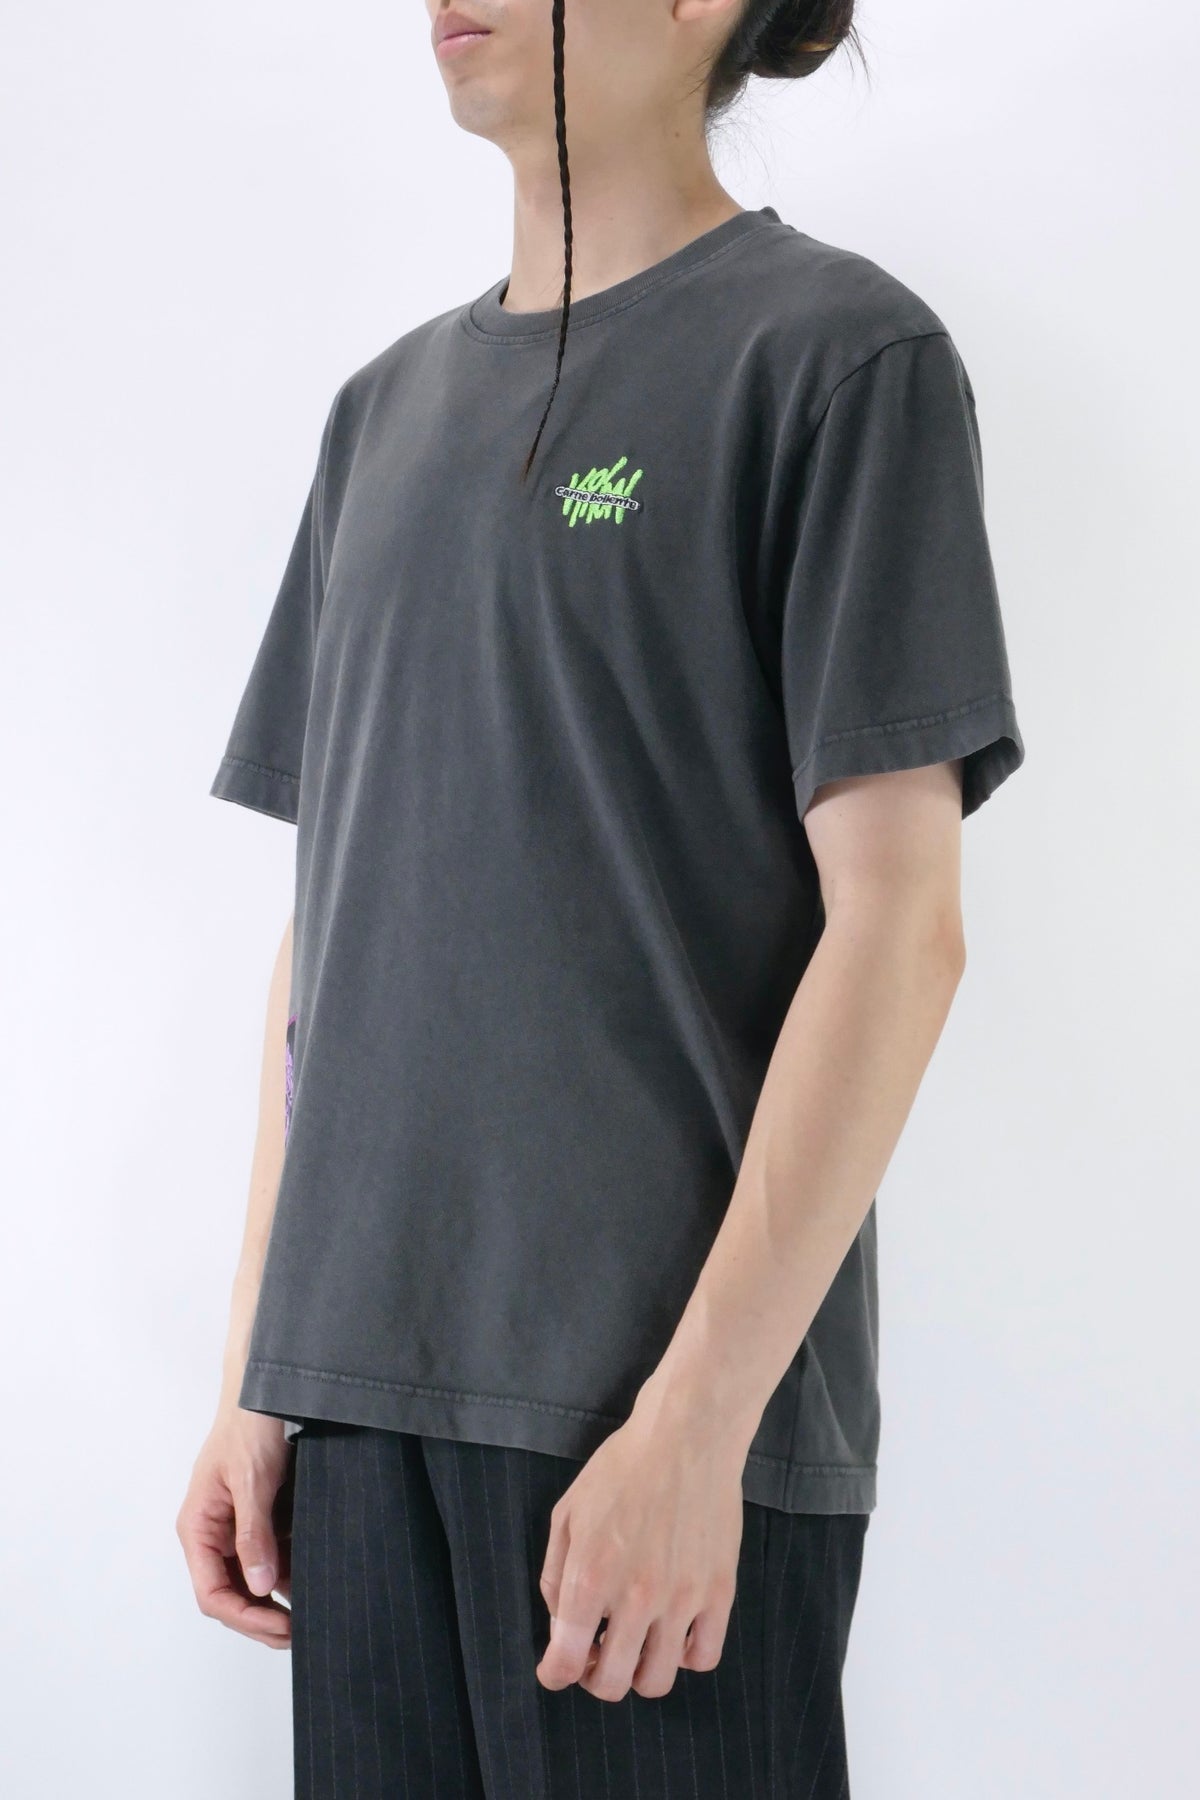 Carne Bollente Earth Beat Viron Tee - Washed Black